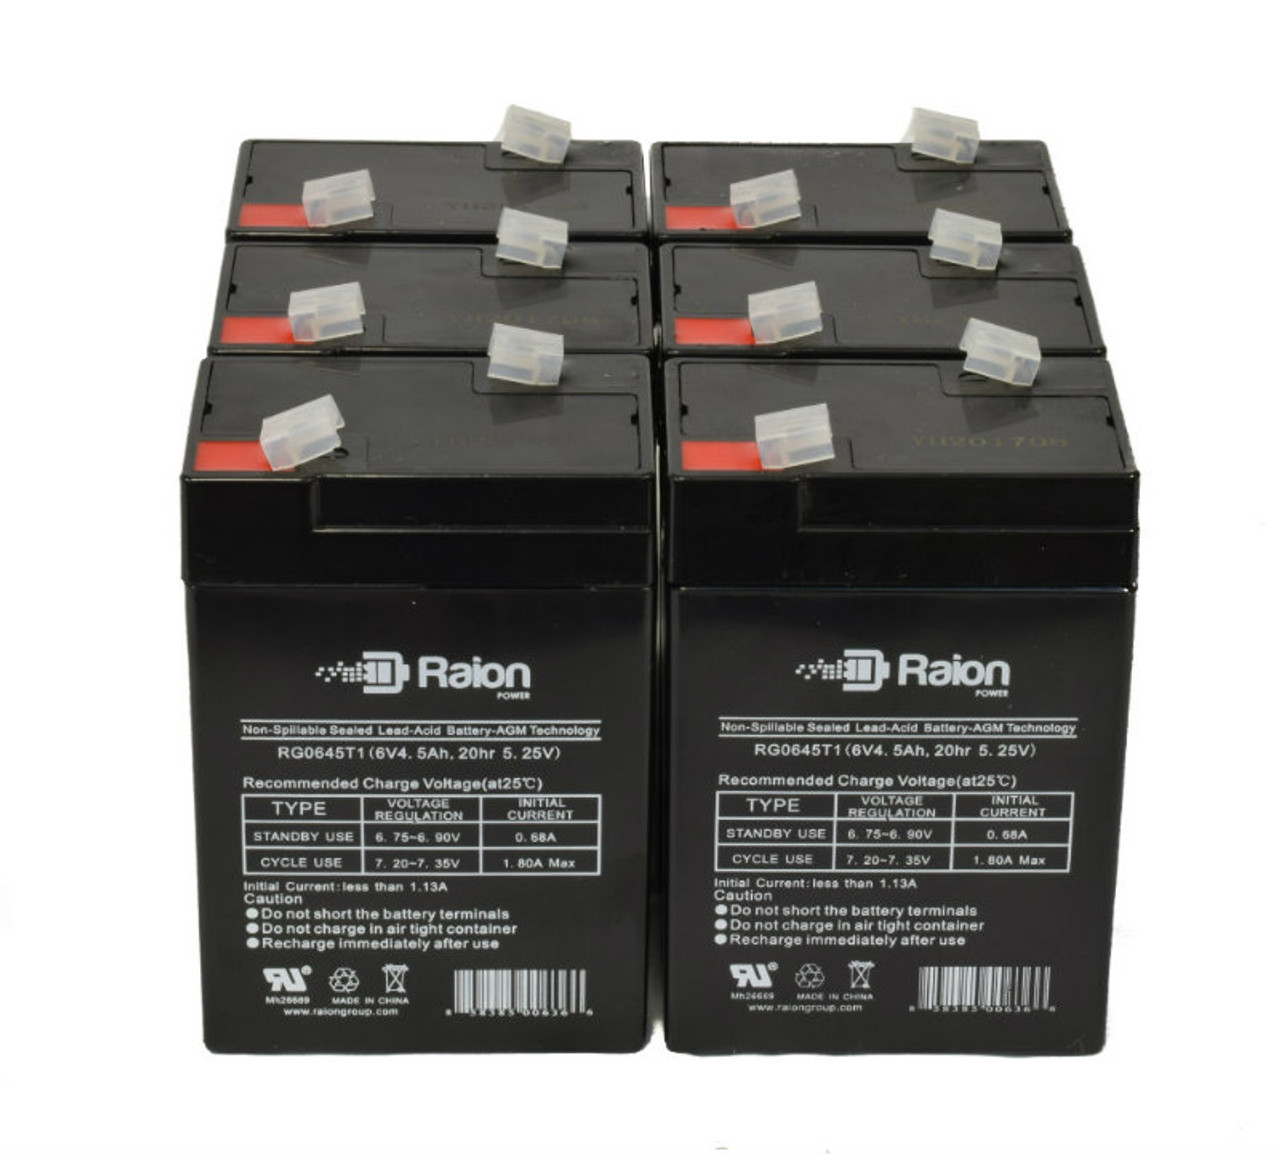 Raion Power 6 Volt 4.5Ah RG0645T1 Replacement Battery for SeaWill SW645B - 6 Pack